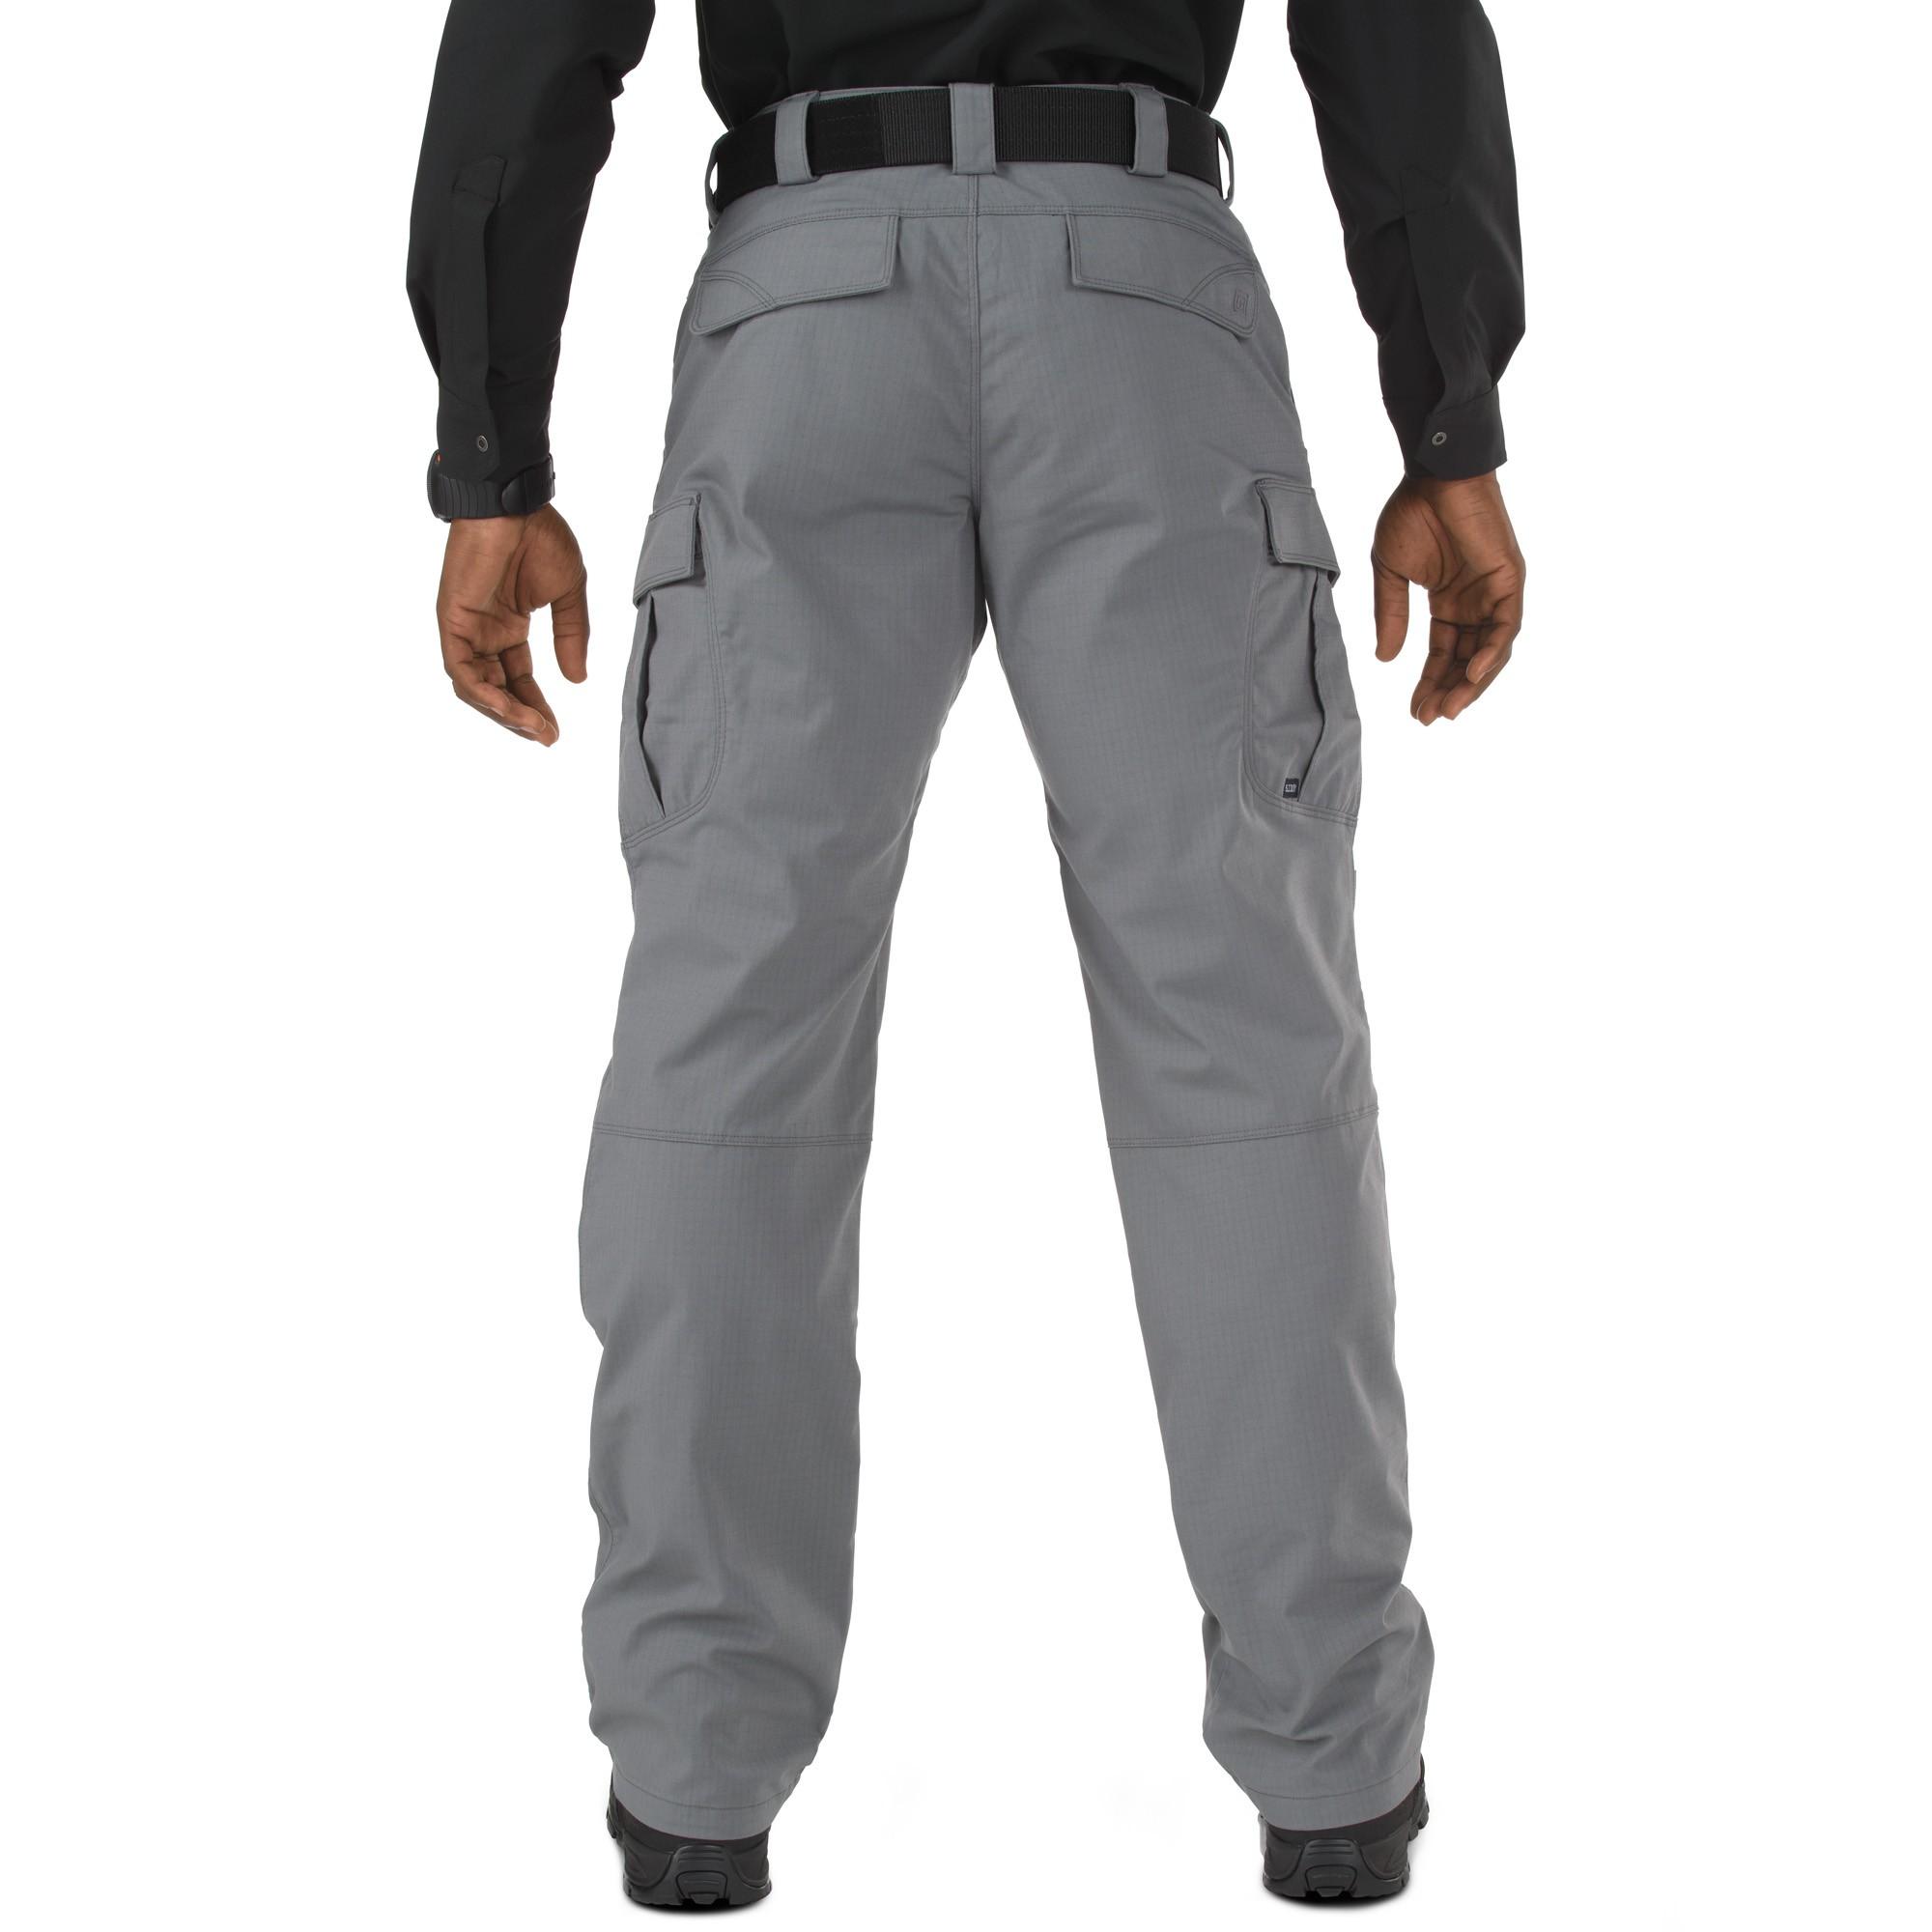 Tactical Uniform for Military, Law Enforcement | Buy 5.11 Stryke Pant ...